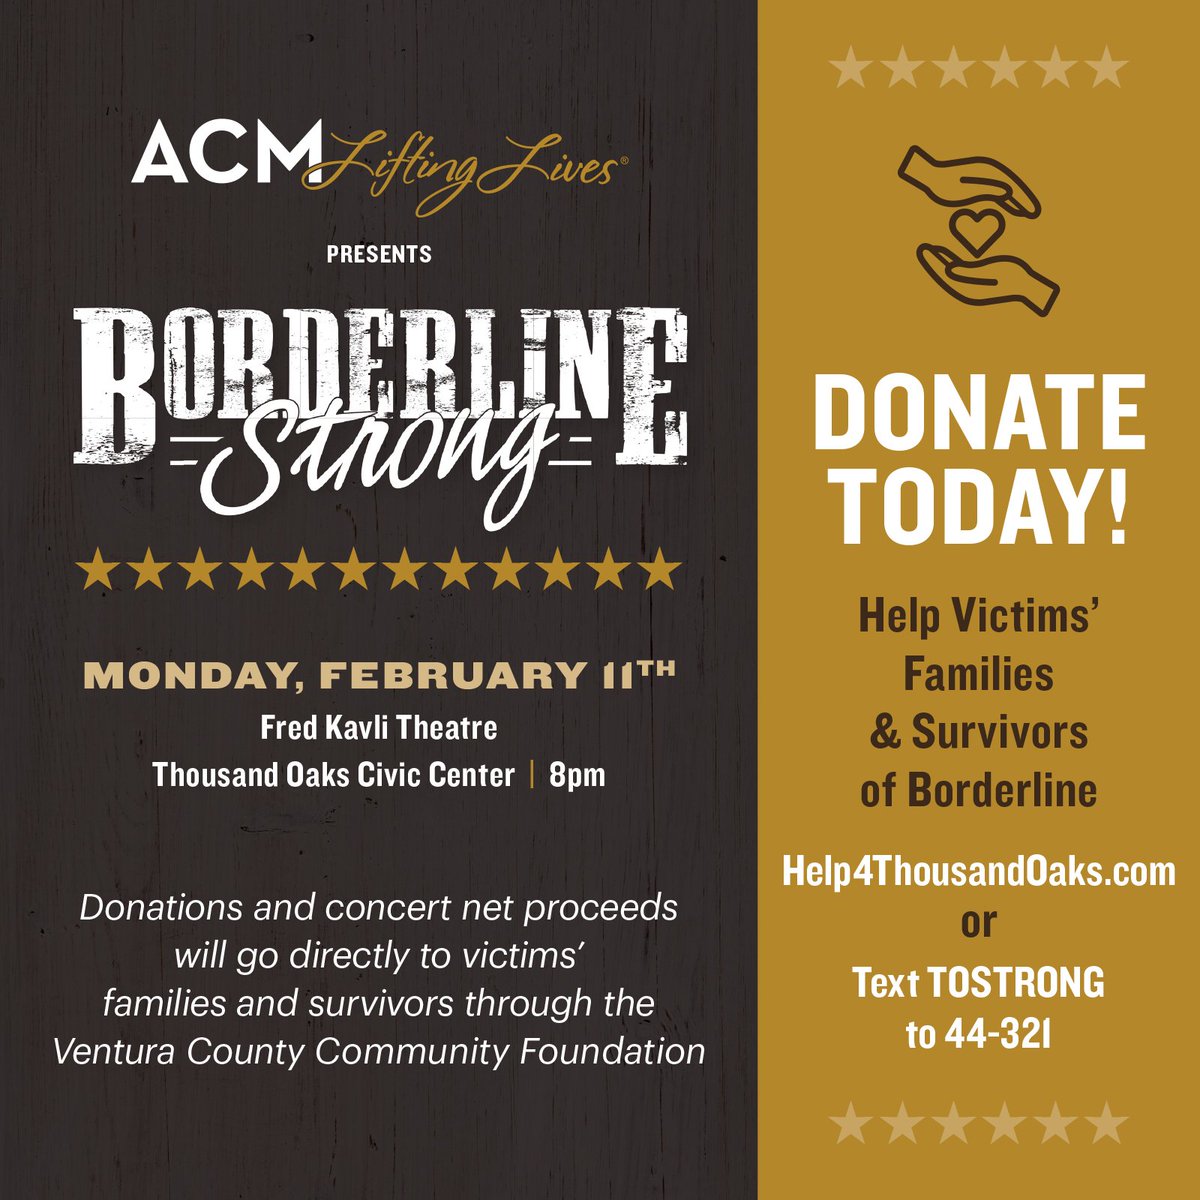 Support a night of Help, Hope & Healing as #ACMLiftingLives Presents: #BorderlineStrong, a one-night-only event featuring performances by @CharlesEsten @TraceAdkins @CassadeePope & more. Purchase tickets at Help4ThousandOaks.com or make a donation by texting TOSTRONG to 44-321